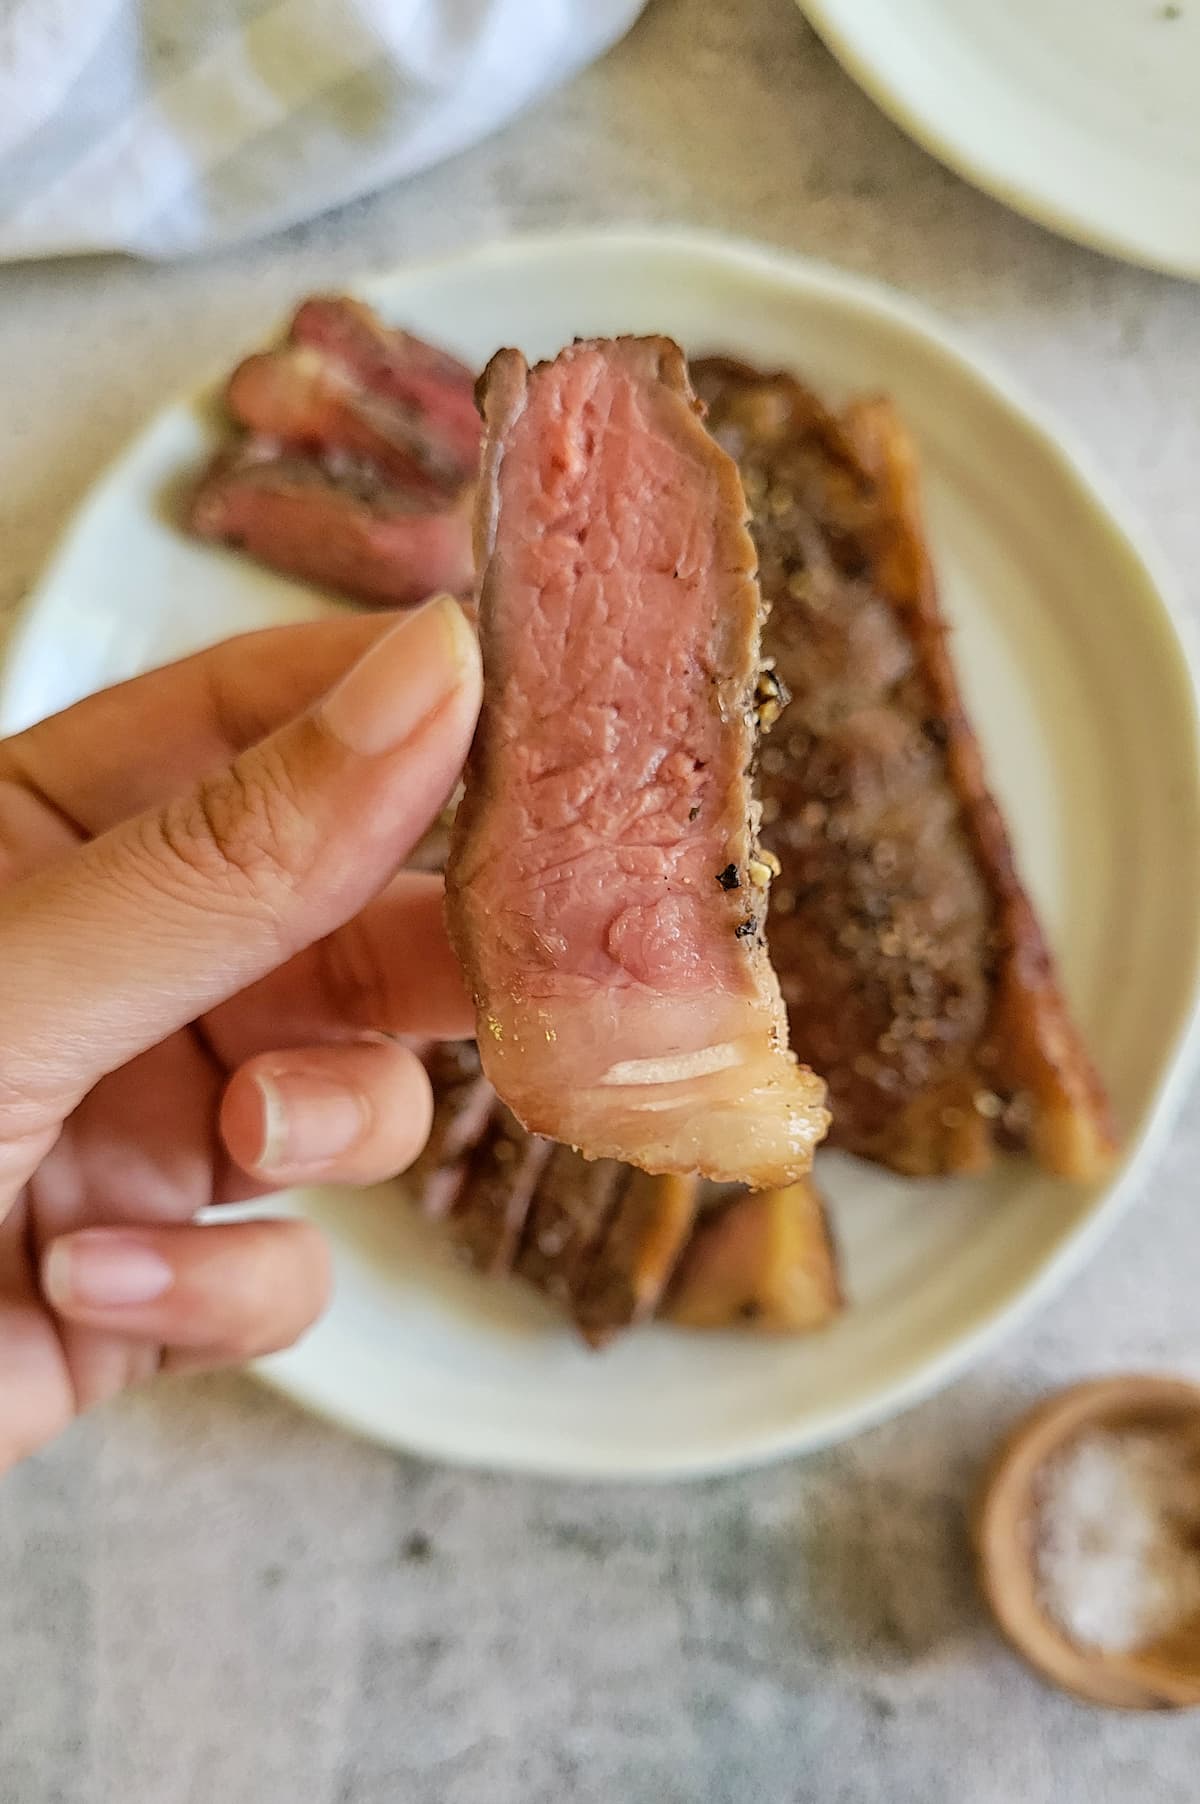 hand holding up a piece of medium rare cooked steak over a plate of the rest